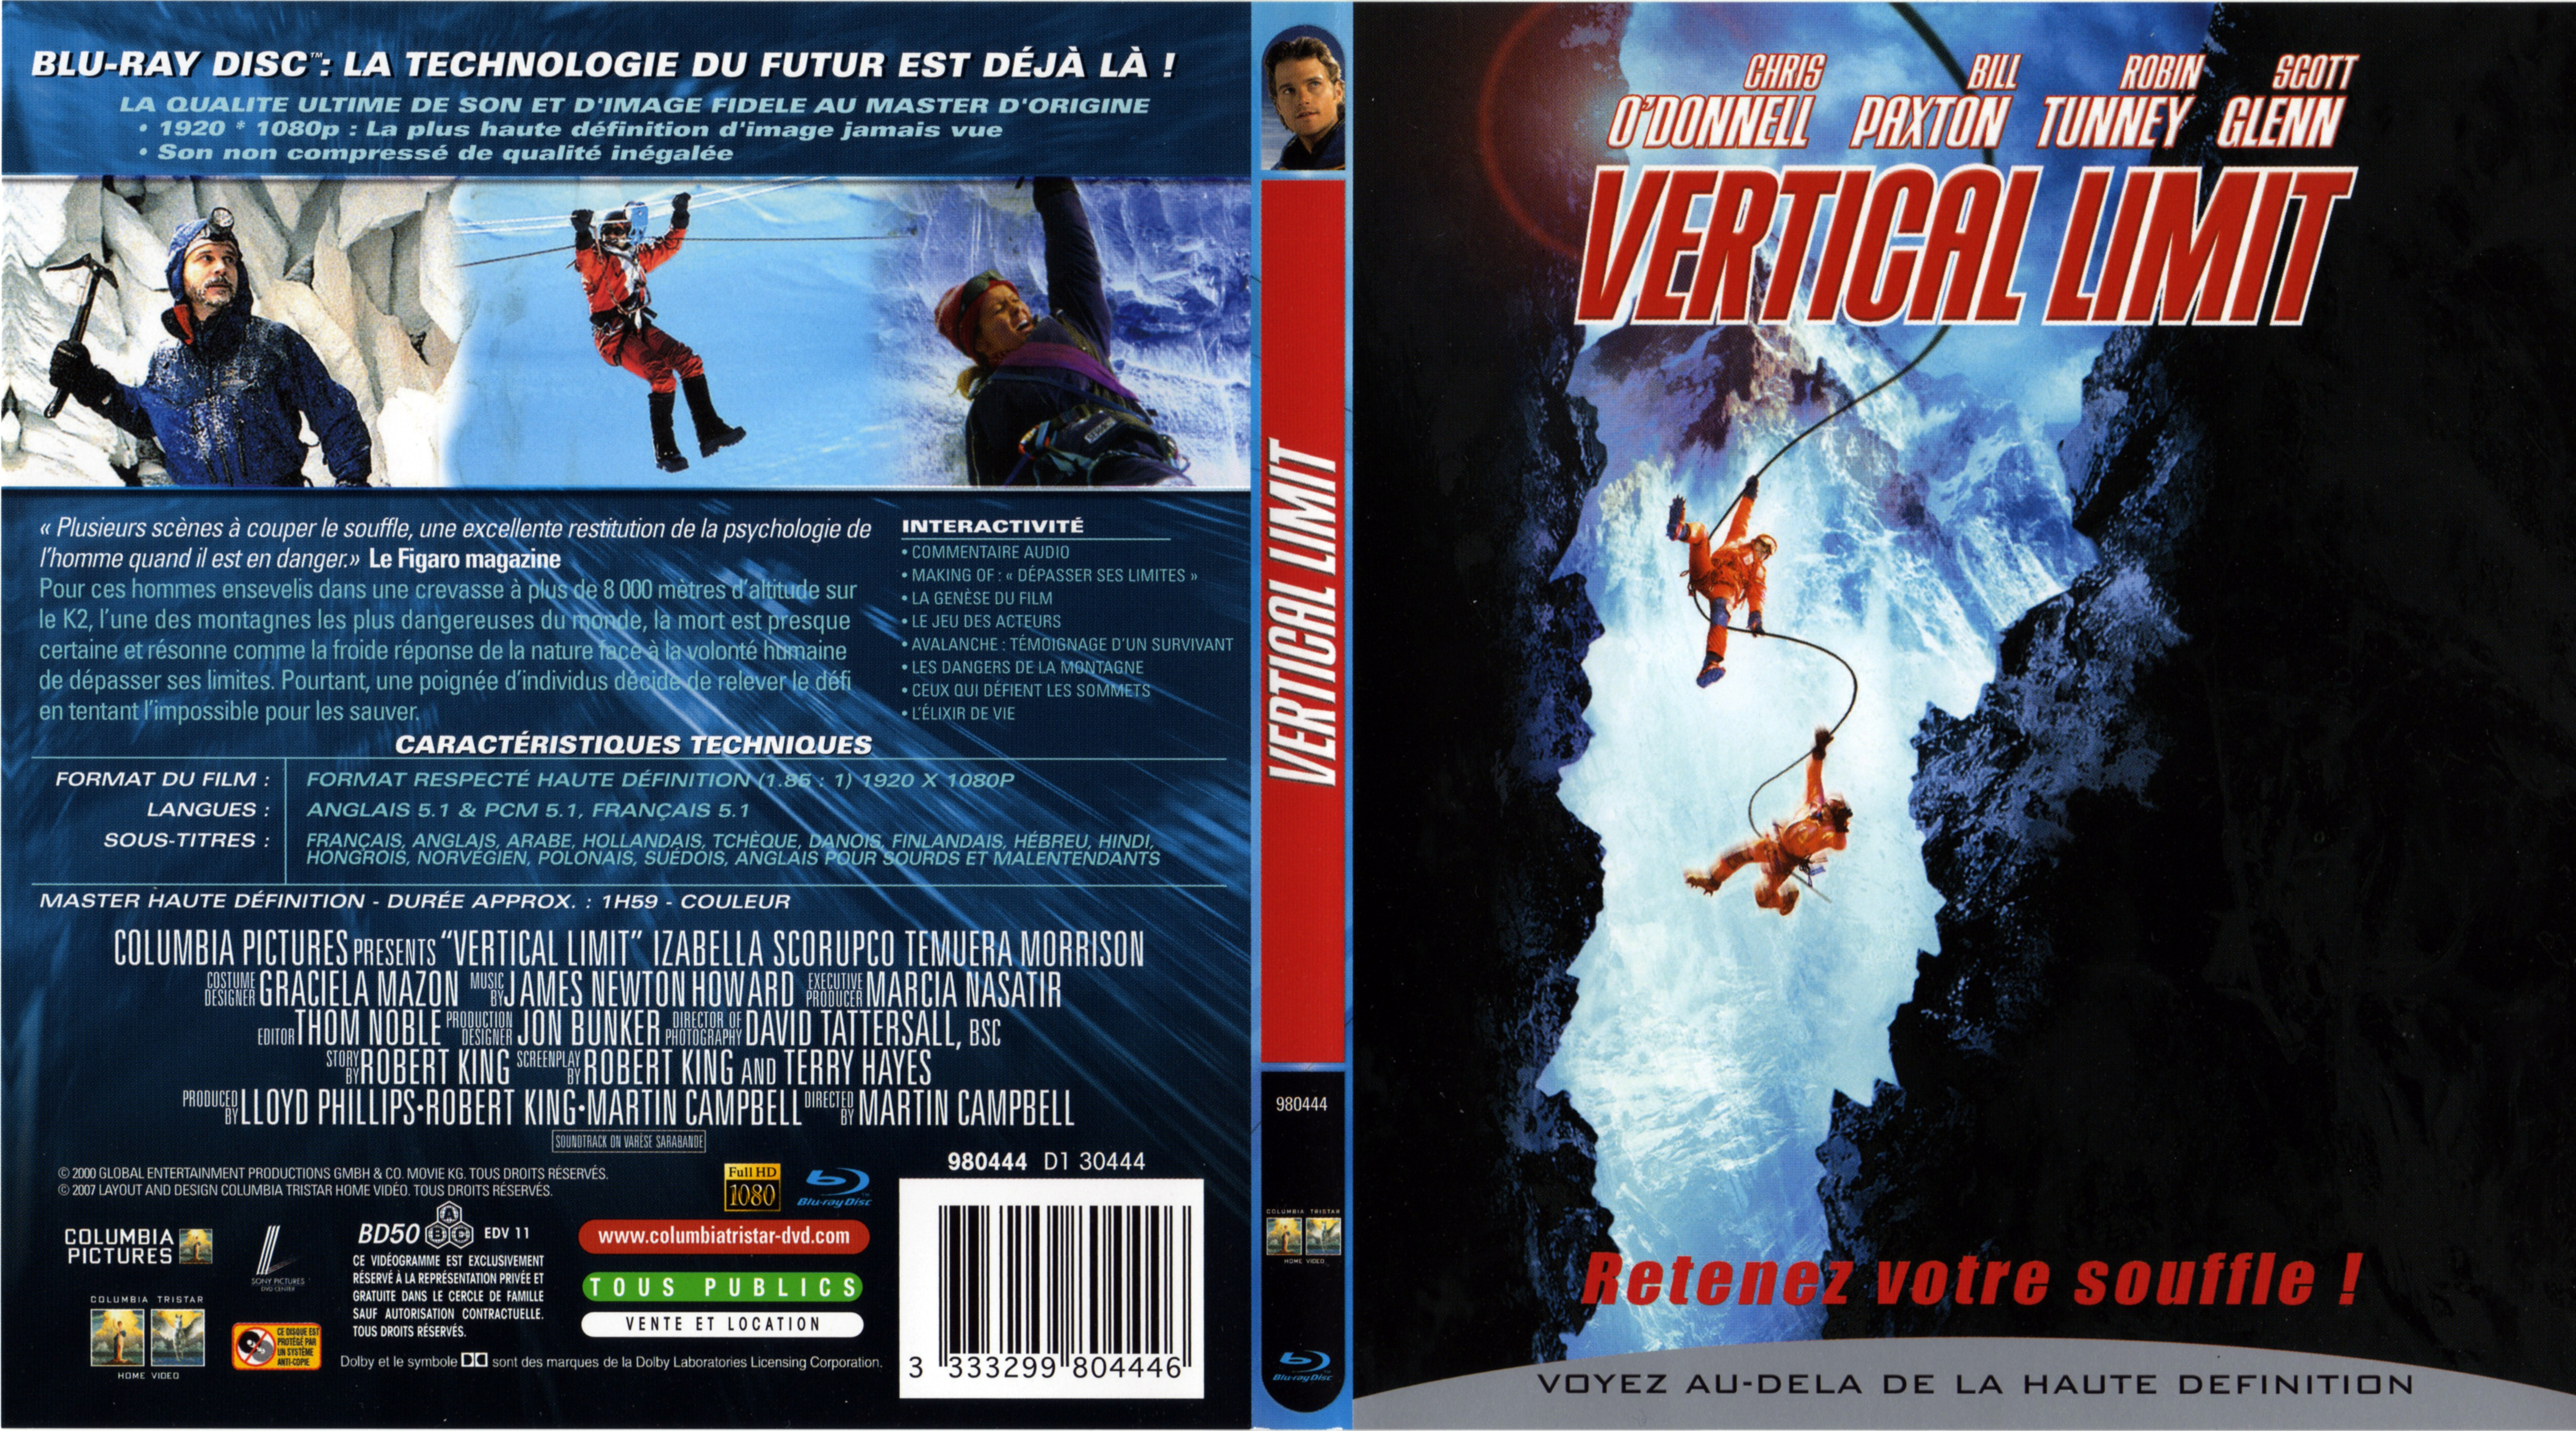 Jaquette DVD Vertical limit (BLU-RAY)